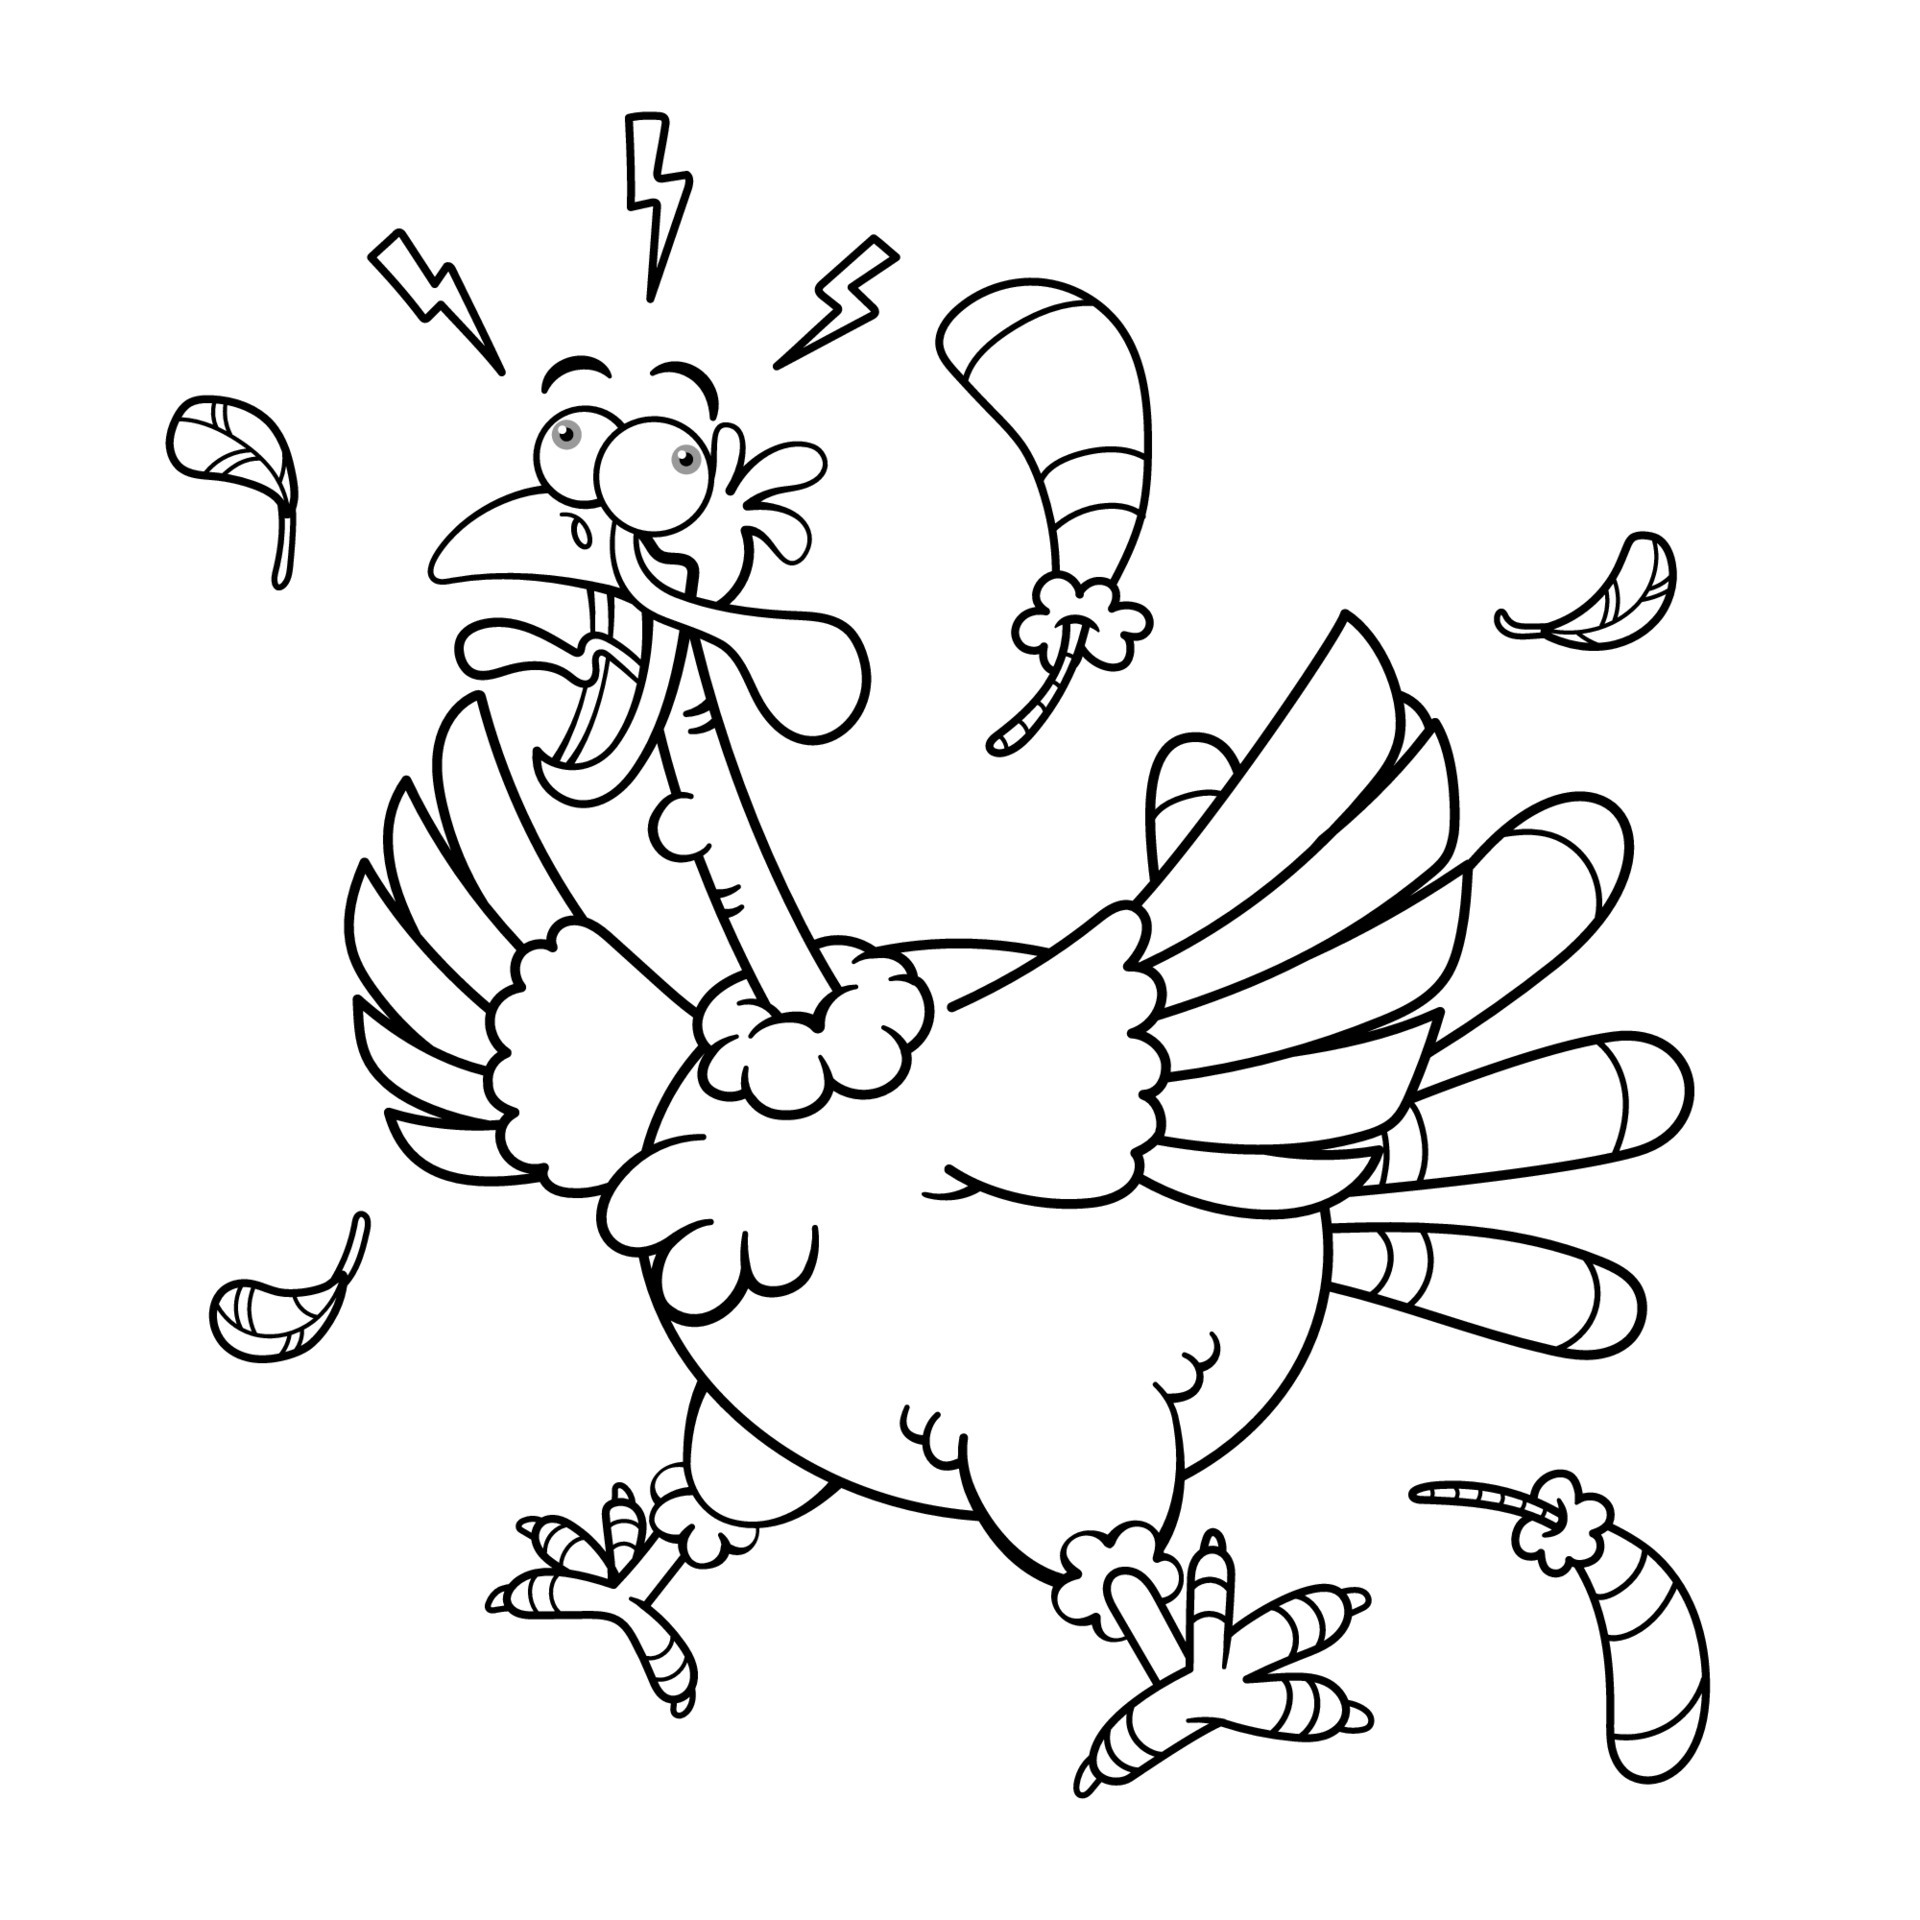 Funny Screaming Turkey Cartoon Character Outline 6941961 ...